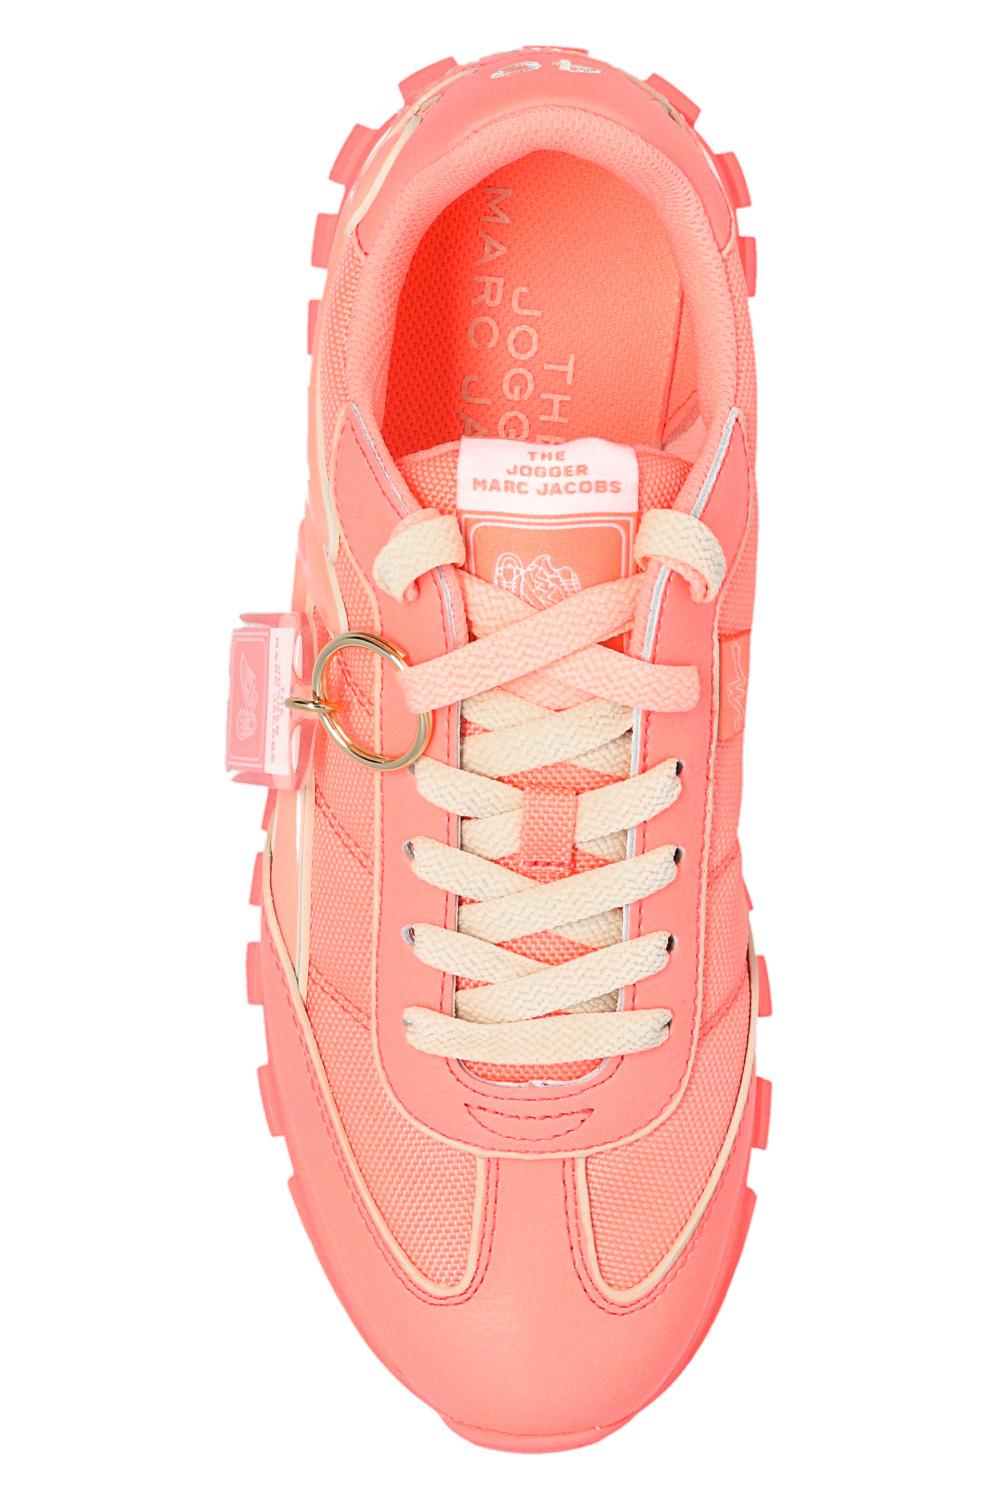 Marc Jacobs Synthetic The Fluoro Jogger Coral Trainers in Neon (Pink) -  Save 61% | Lyst